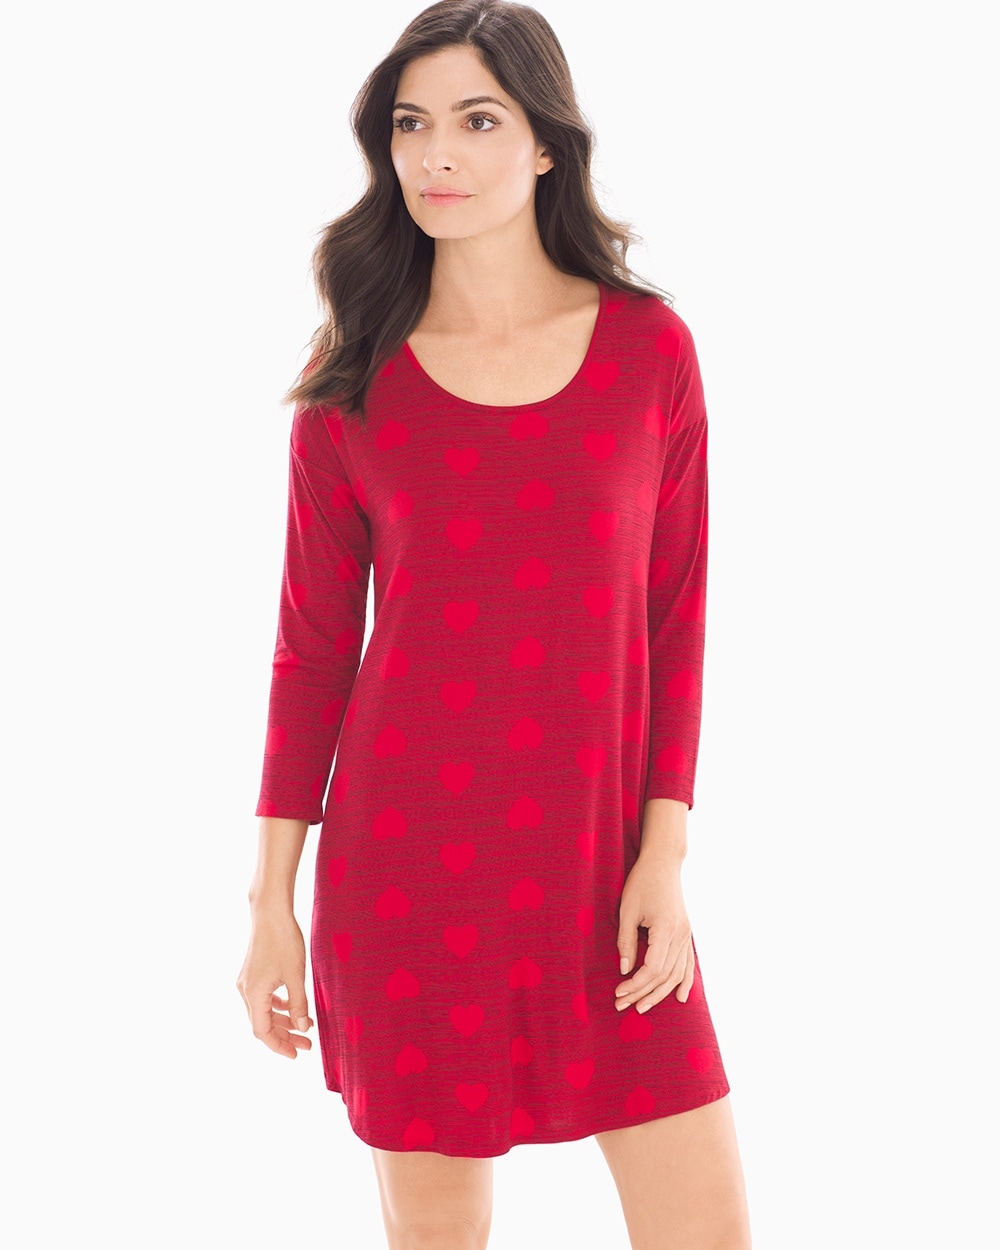 Cool Nights Relaxed Sleepshirt Hearts Festive Red